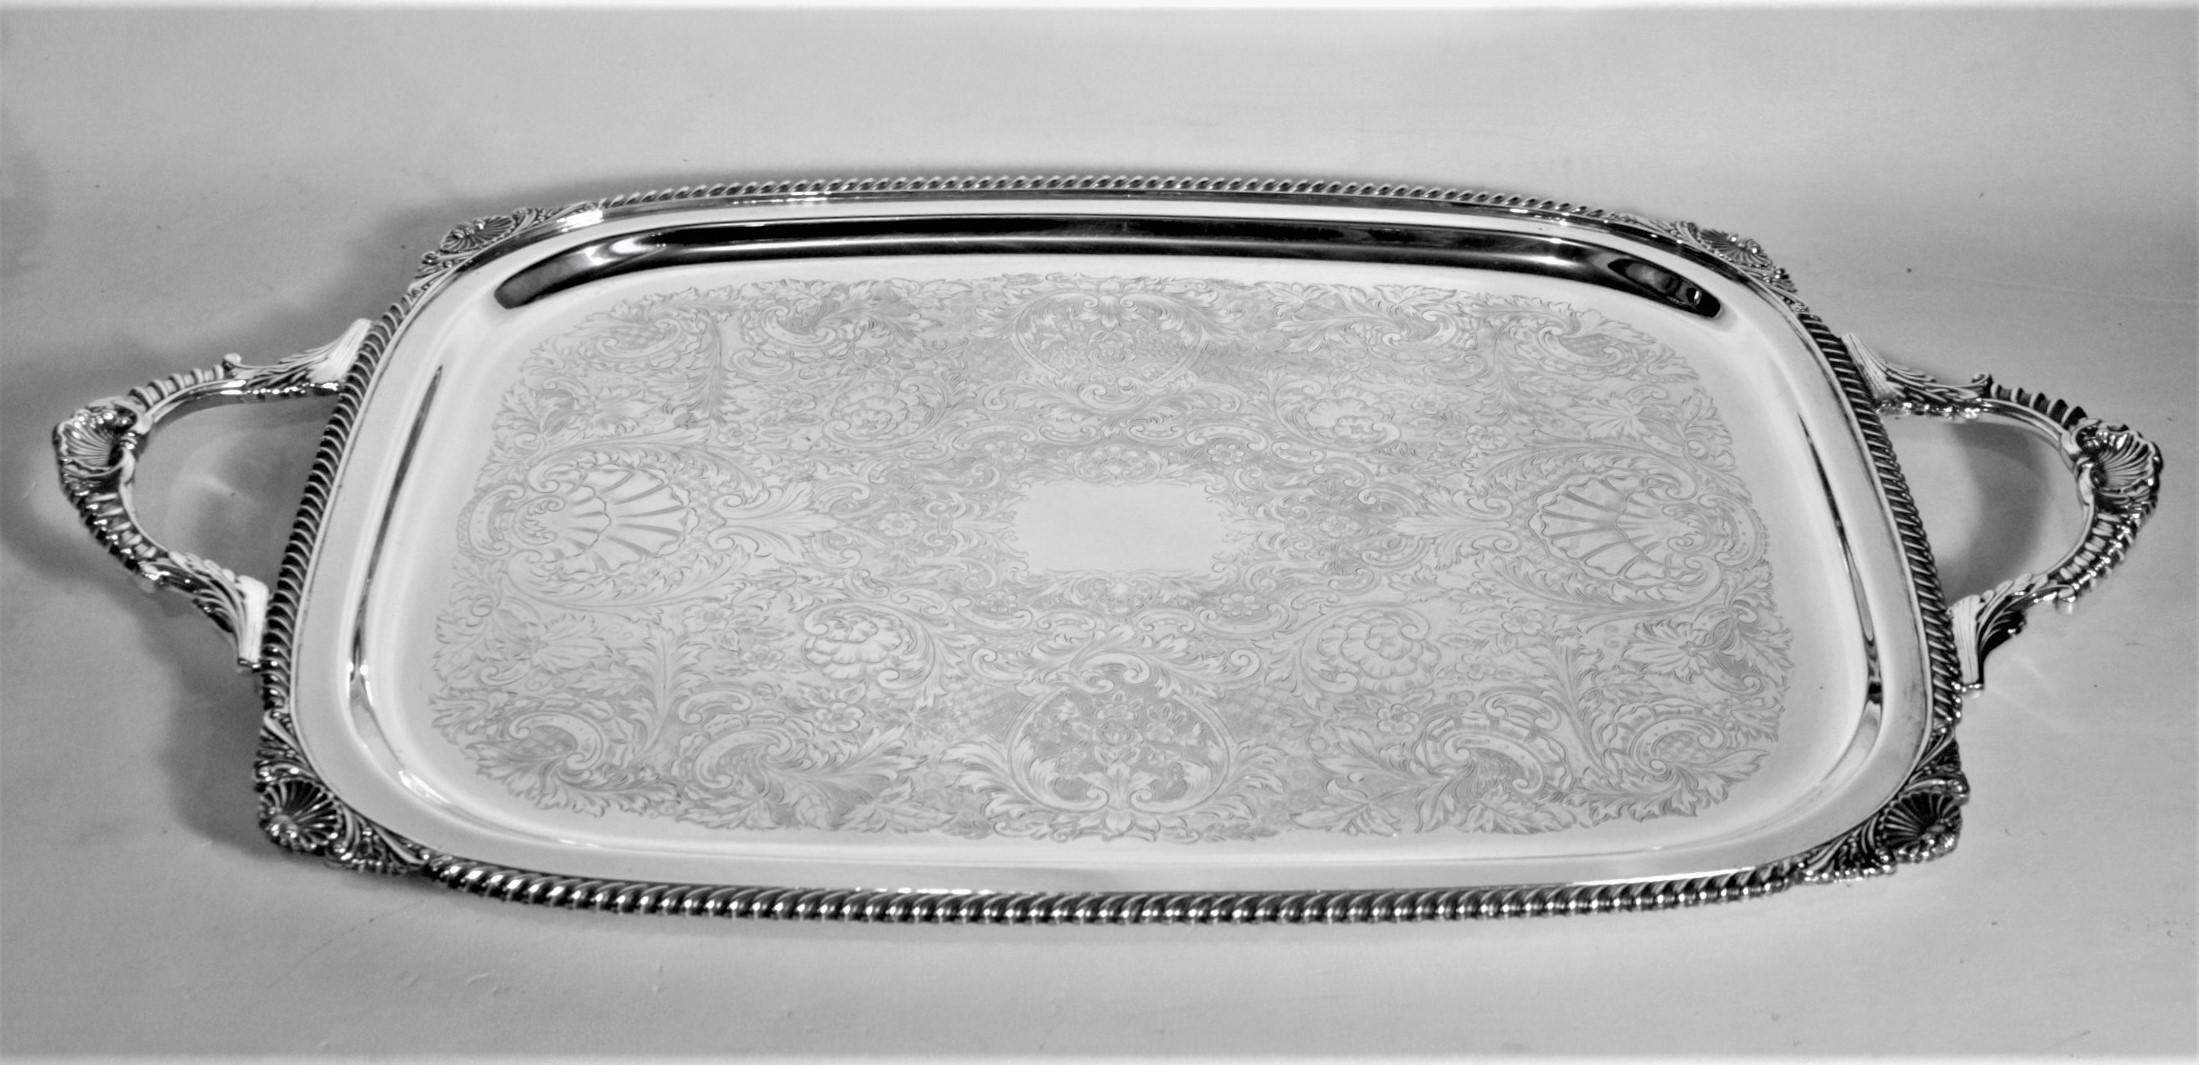 Edwardian Birks Regency Silver Plated Serving Tray with Ornate Handles & Engraving